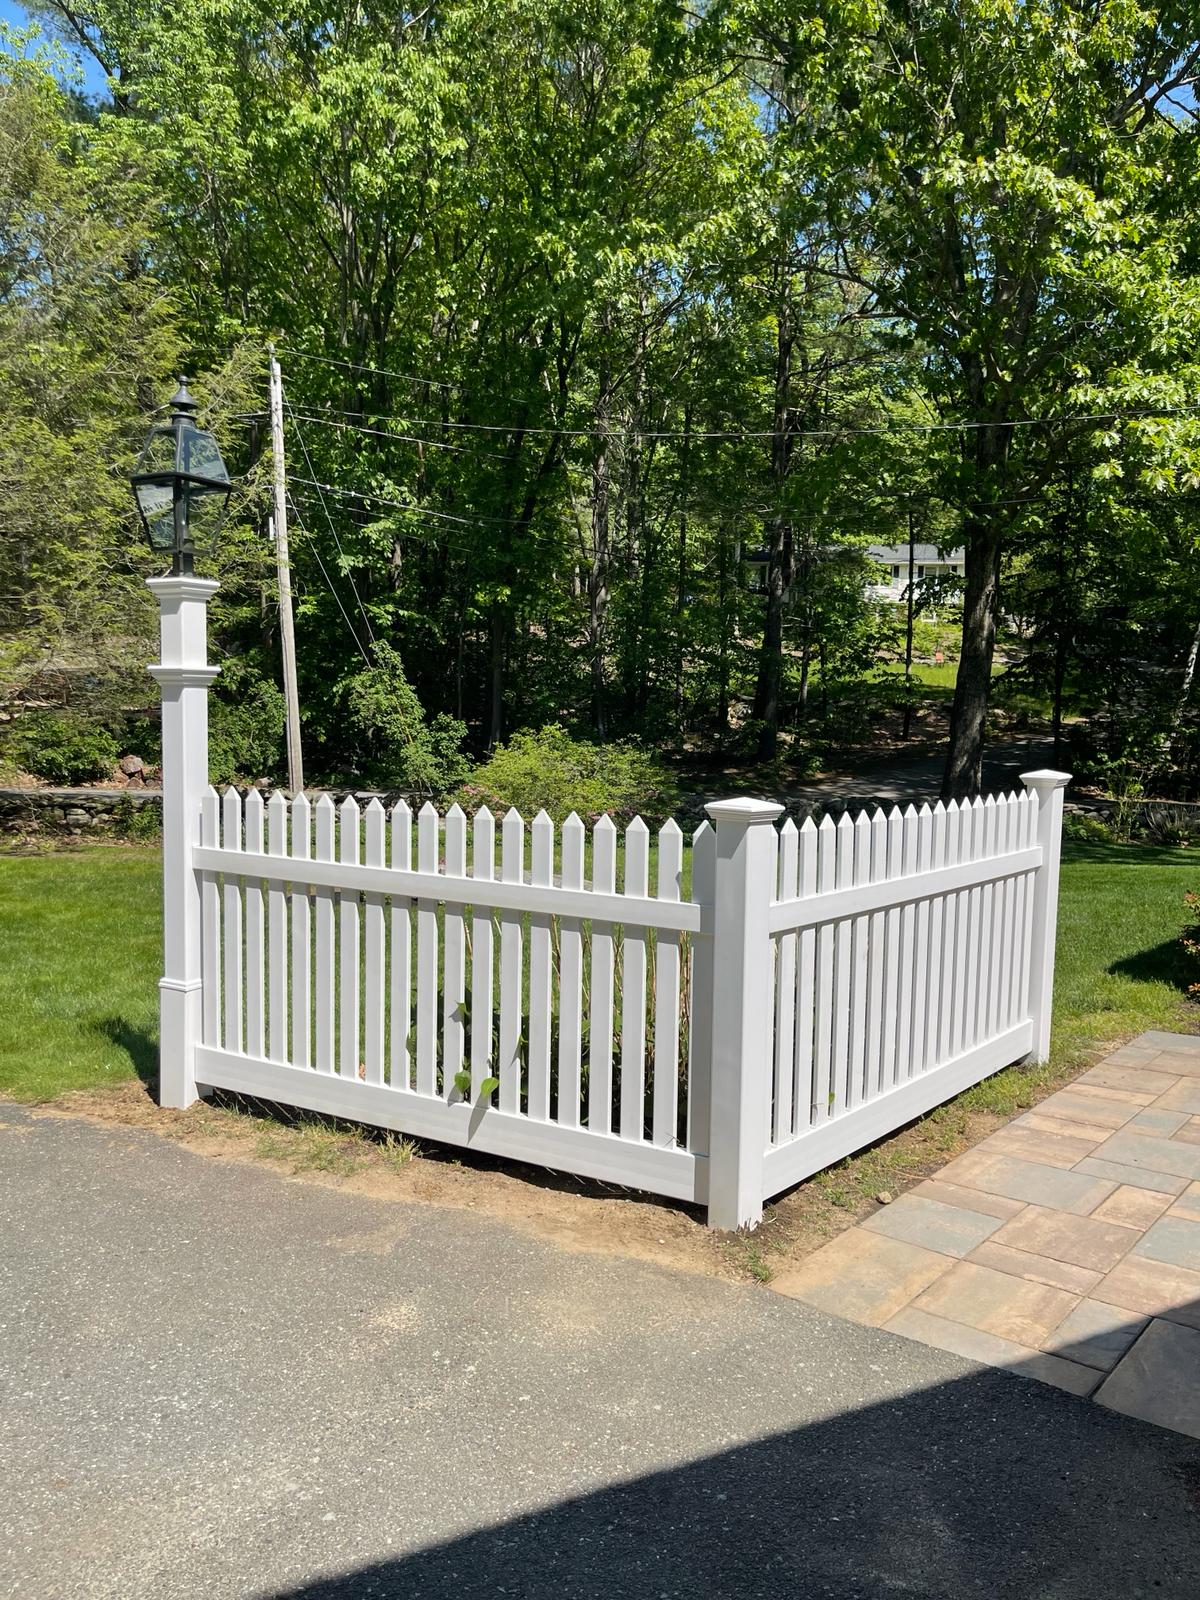 New England Fences - Fence Contractor | Aluminum/Wood/Metal Fencing in Clinton MA